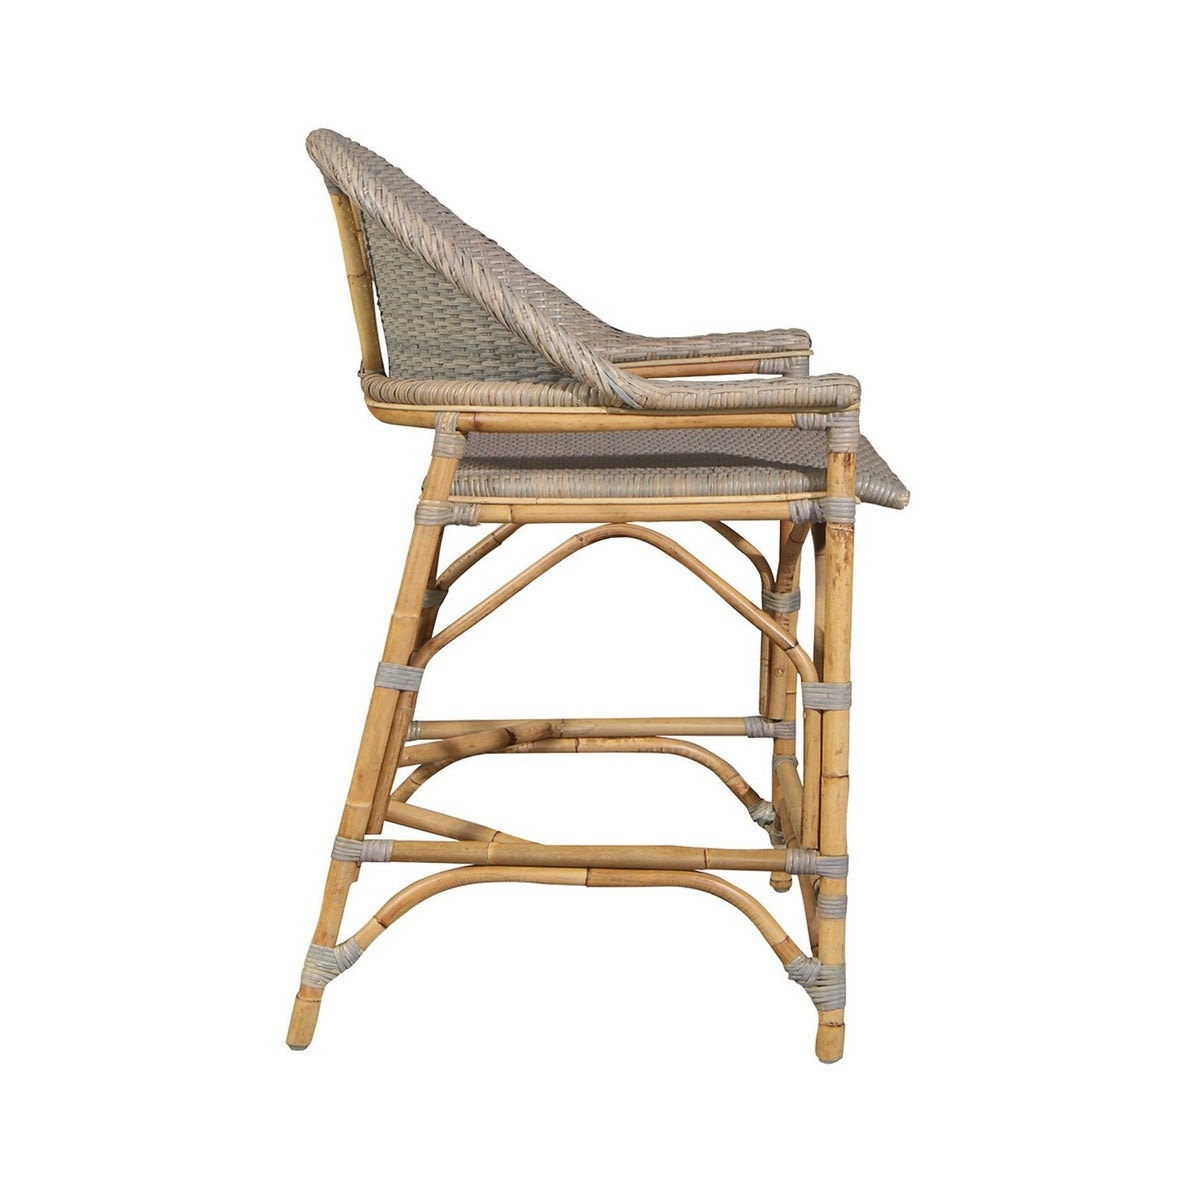 NEW!!  Newport Beach Counter ChairFrame Color - NaturalWeave Color - Fog Gray